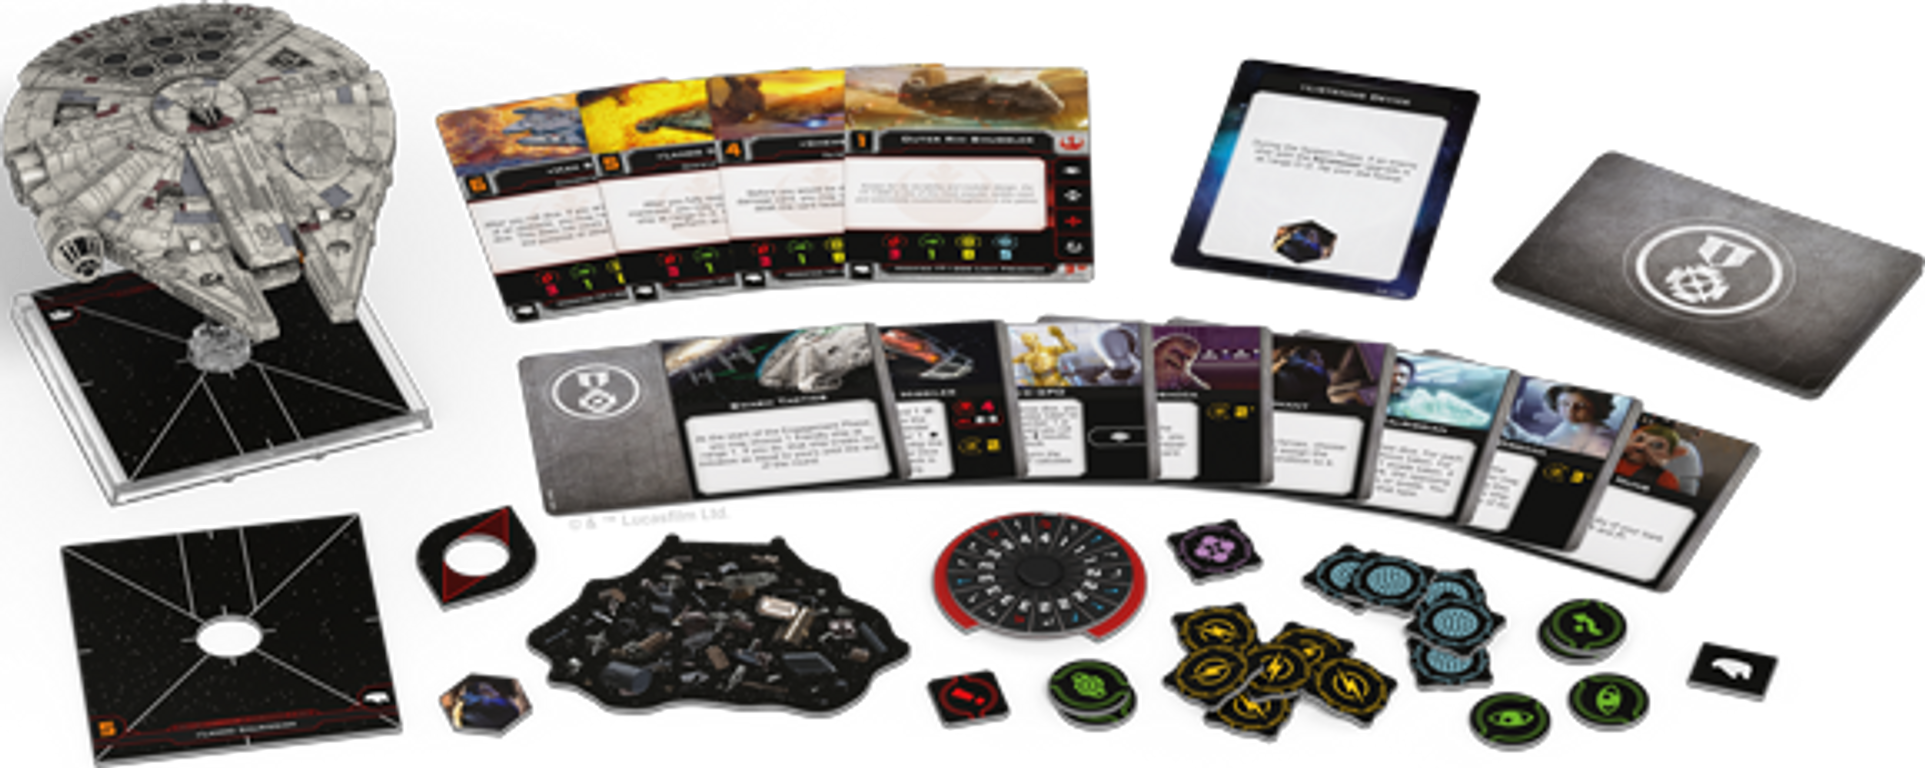 Star Wars: X-Wing (Second Edition) – Millennium Falcon Expansion Pack partes